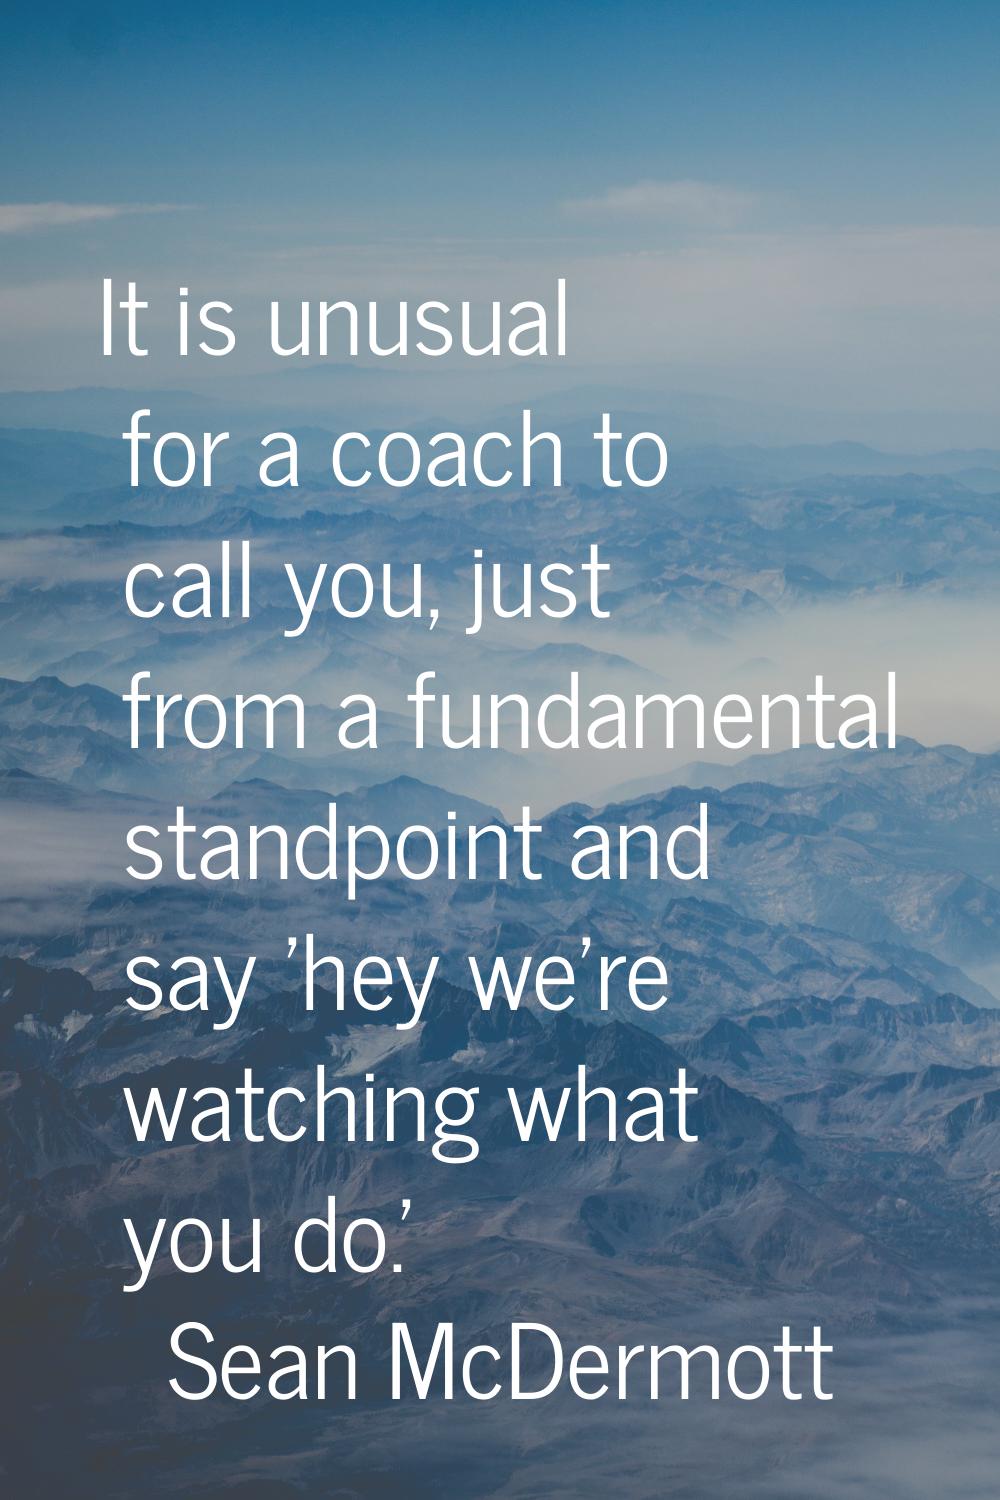 It is unusual for a coach to call you, just from a fundamental standpoint and say 'hey we're watchi